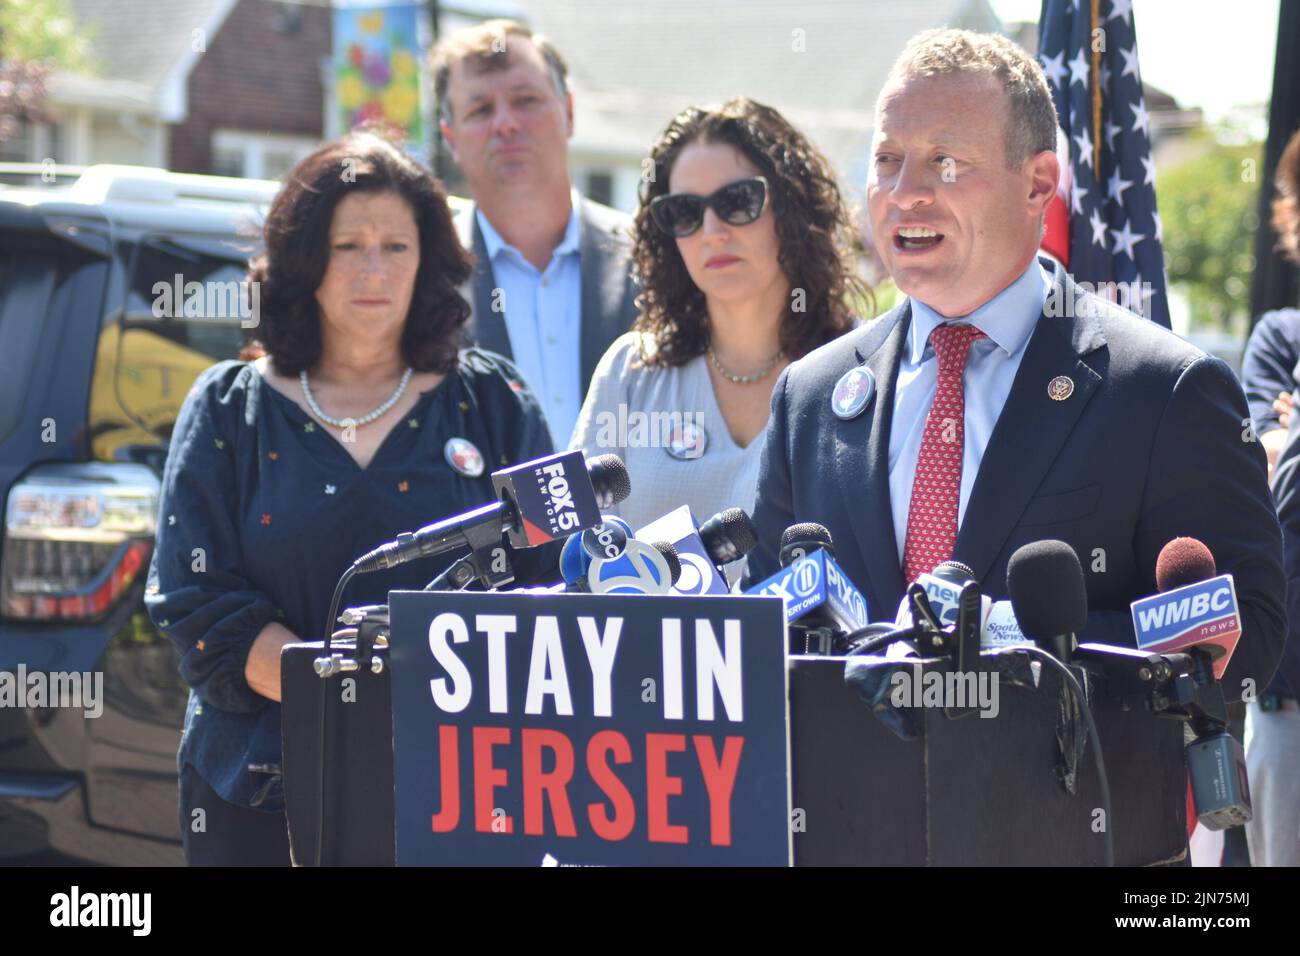 Fair Lawn, NJ, USA. 9th Aug, 2022. (NEW) New Jersey Leaders Announce New State Legislation to Combat NYC Congestion Tax Whacking Jersey Drivers. August 09, 2022, Fair Lawn, New Jersey, USA: Congressman Josh Gottheimer (NJ-5) and New Jersey Leaders announce New State Legislation to combat NYC Congestion Tax Whacking Jersey Drivers. This is to help incentivize the development of businesses in Jersey that reduce commute time for full-time employees, helping Jersey residents Ã¢â‚¬Å“Stay in JerseyÃ¢â‚¬Â and avoid New YorkÃ¢â‚¬â„¢s proposed Congestion Tax. (Credit Image: © Kyle Mazza/TheNEWS2 via Stock Photo